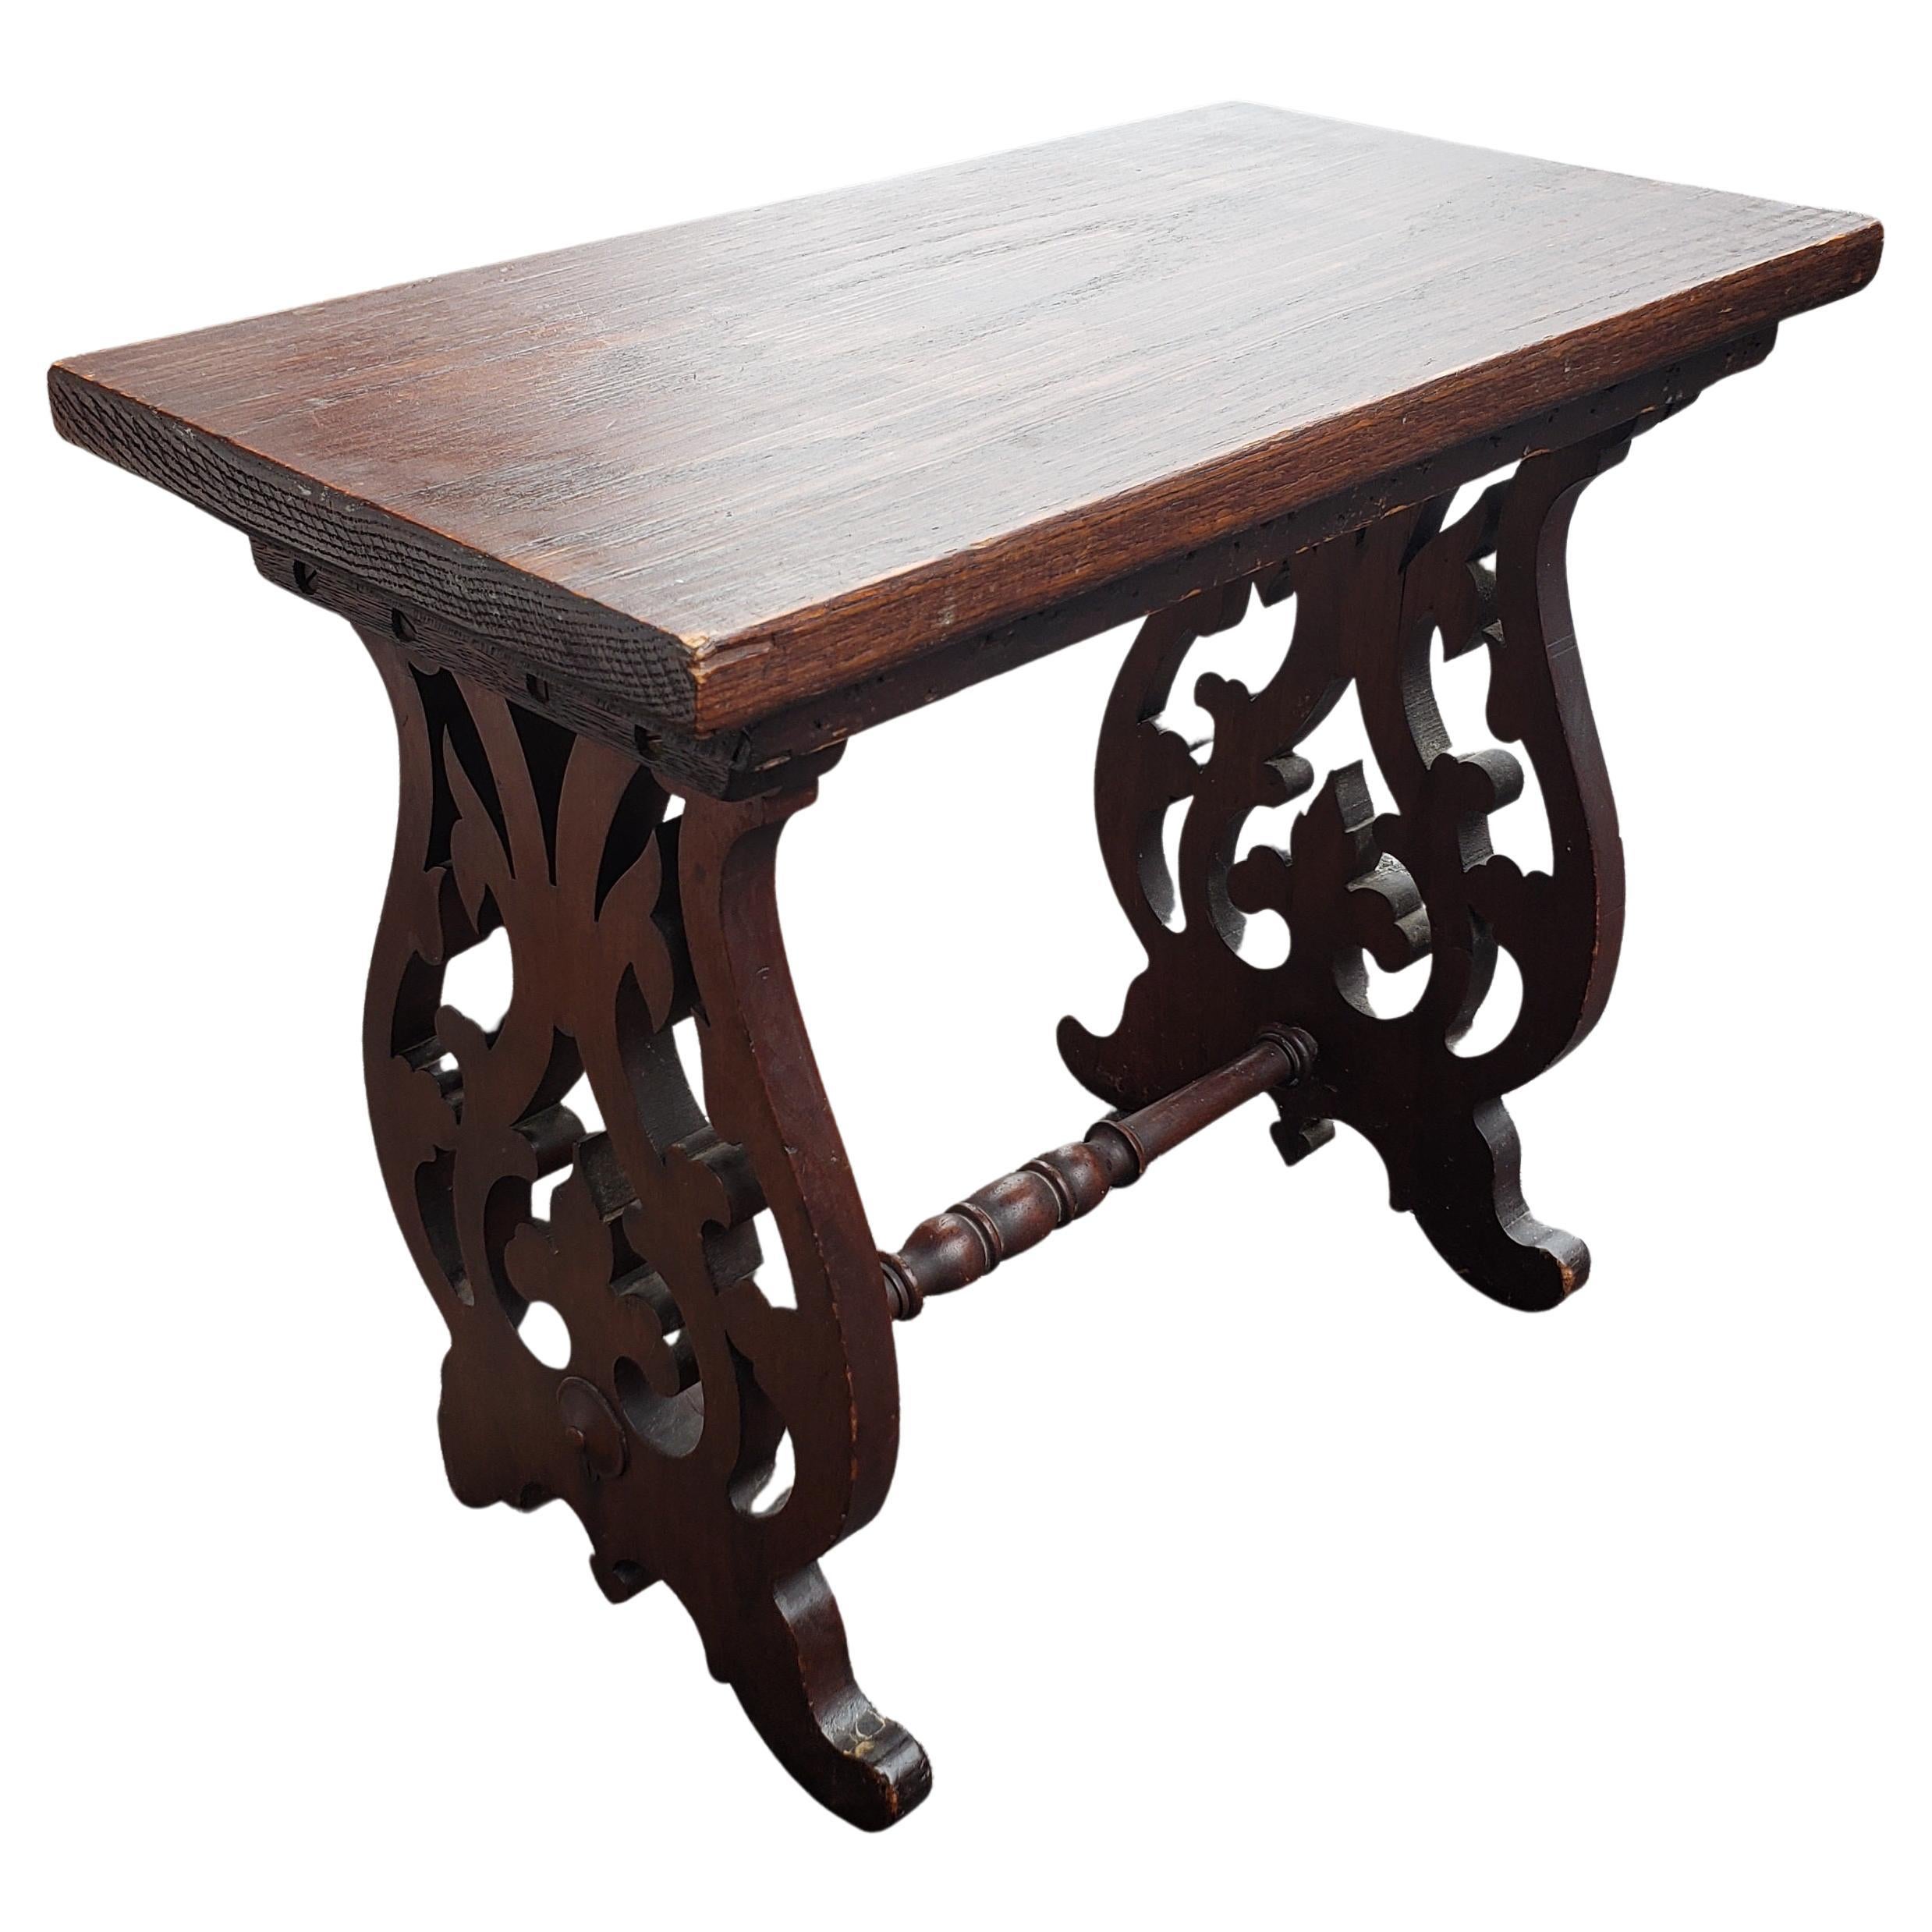 A patinated 1920 Edwardian handcrafted and Carved Oak Trestle Bench or Table. 
Measures22